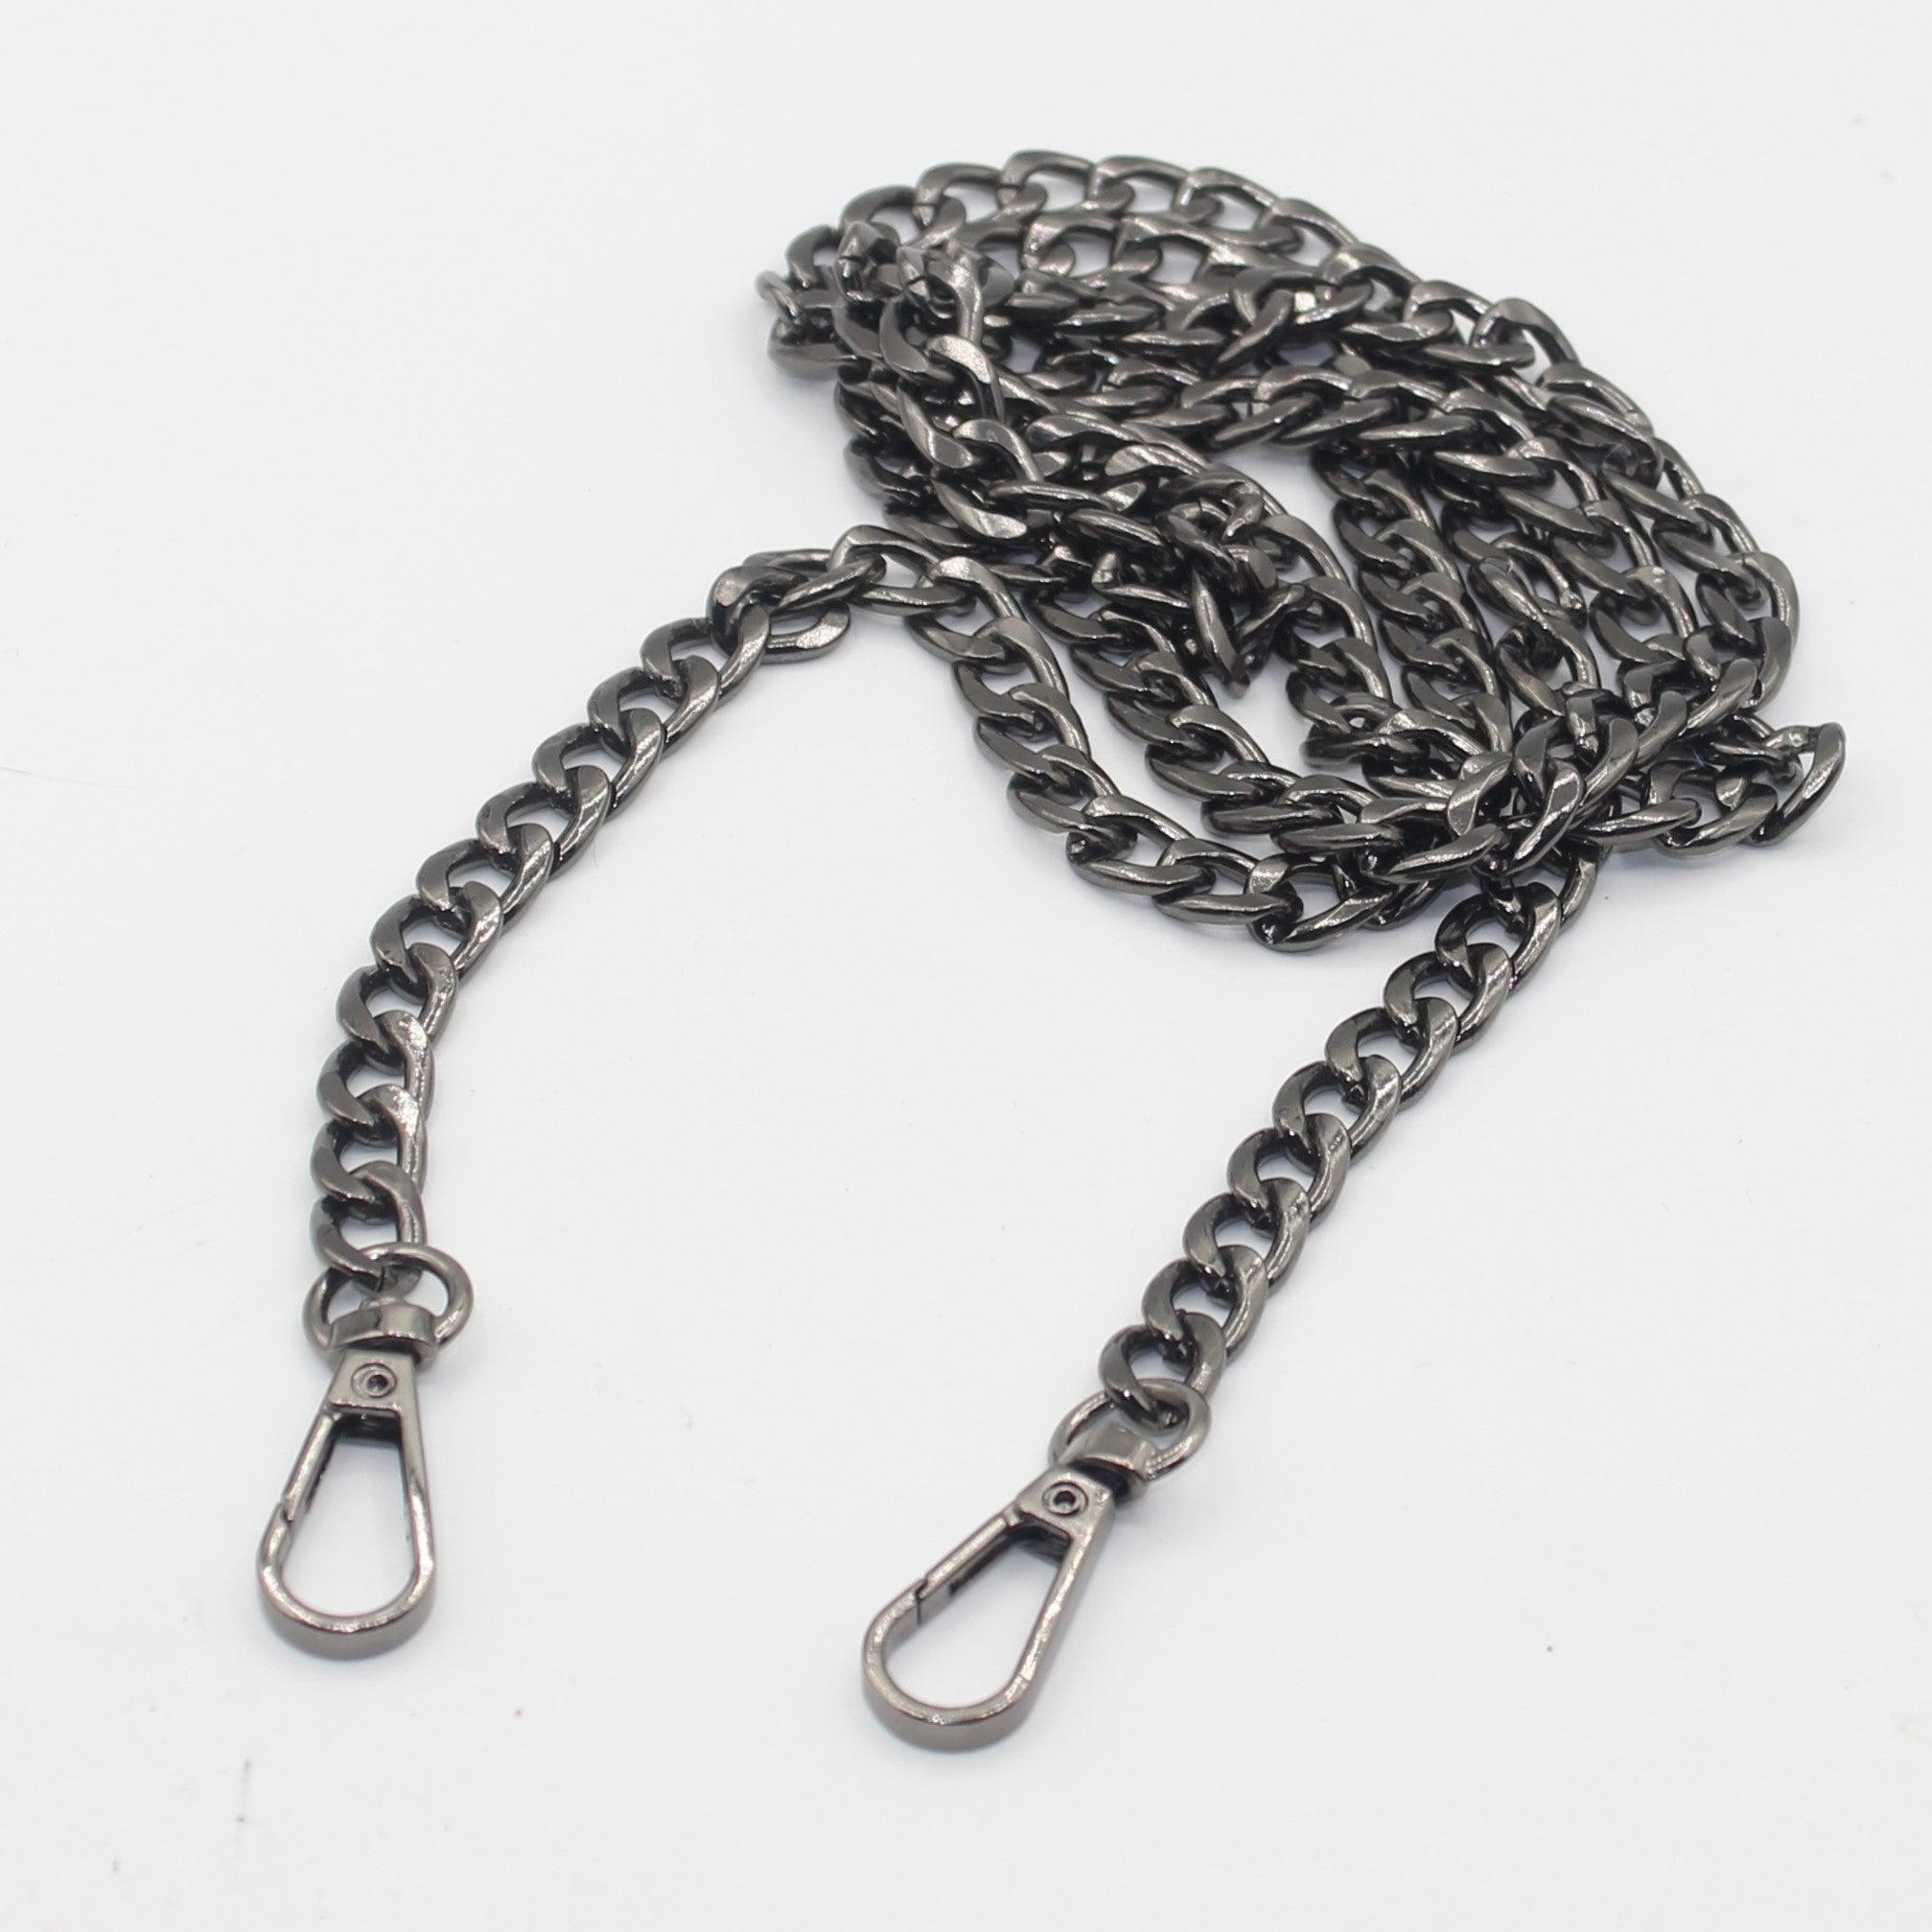 120cm long Chain with Lobsters (8mm rings) #CHAIN534 - ACCESSOIRES LEDUC BV